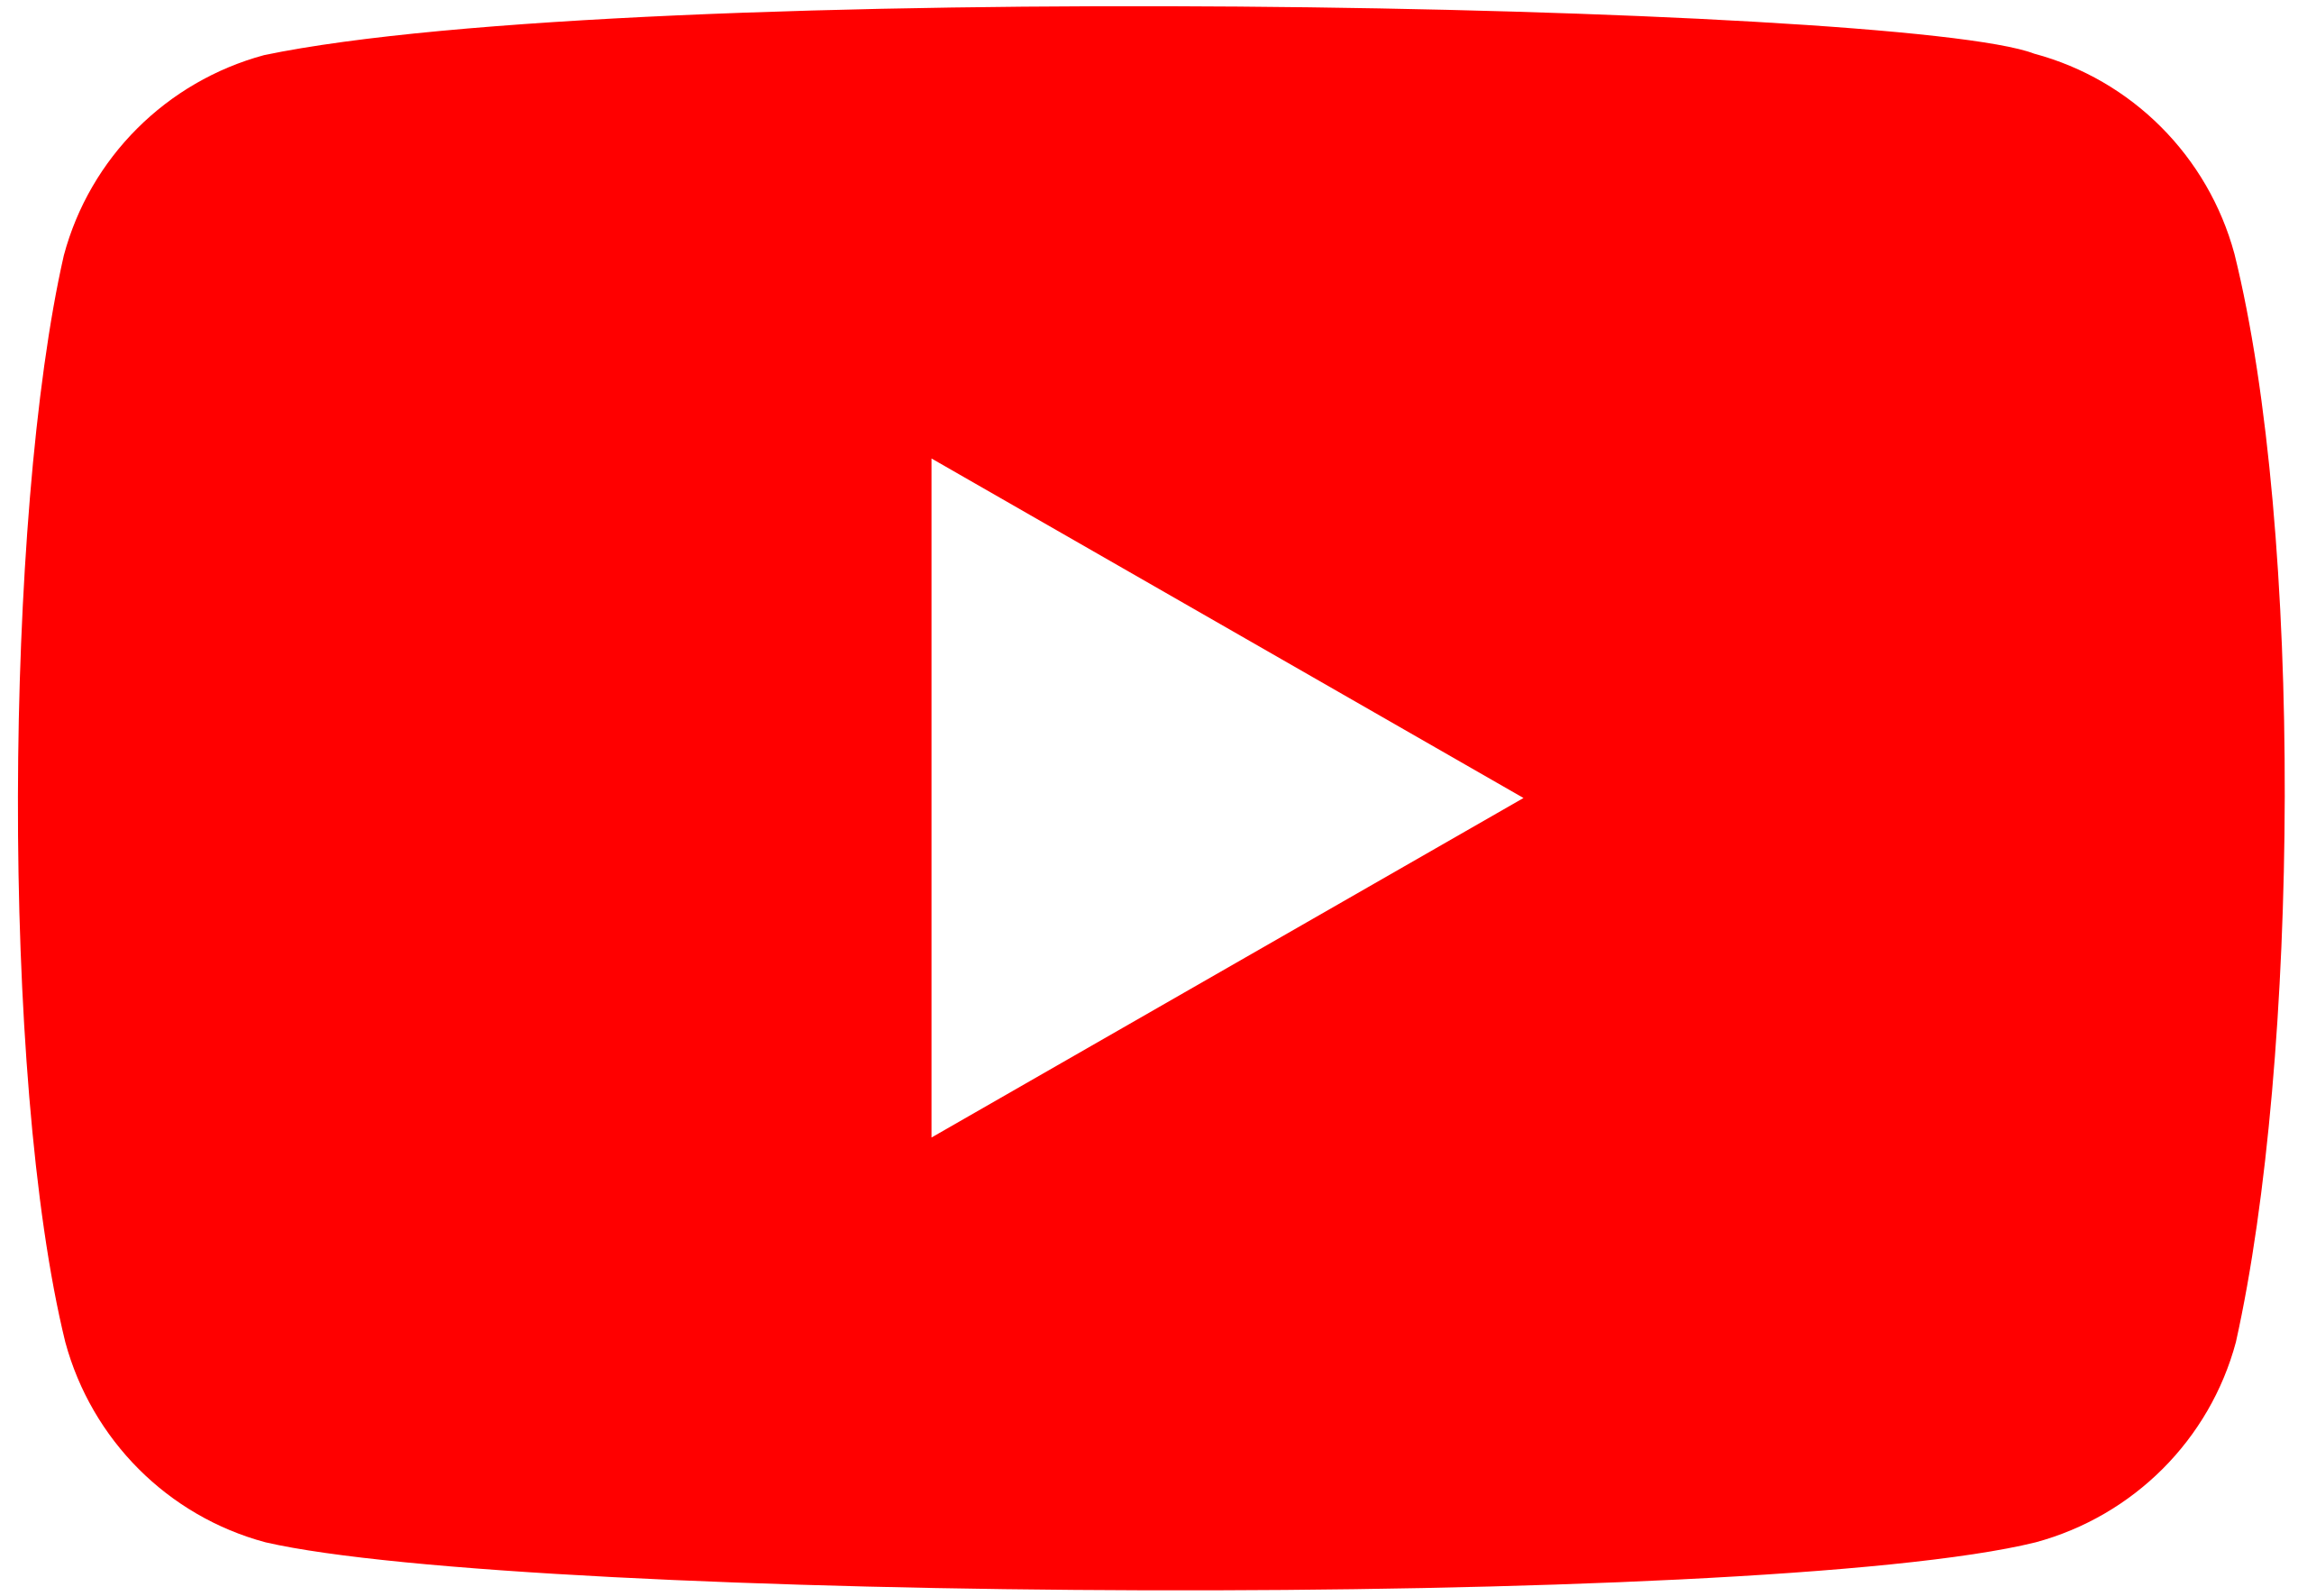 YouTube_full-color_icon_(2017).svg.webp